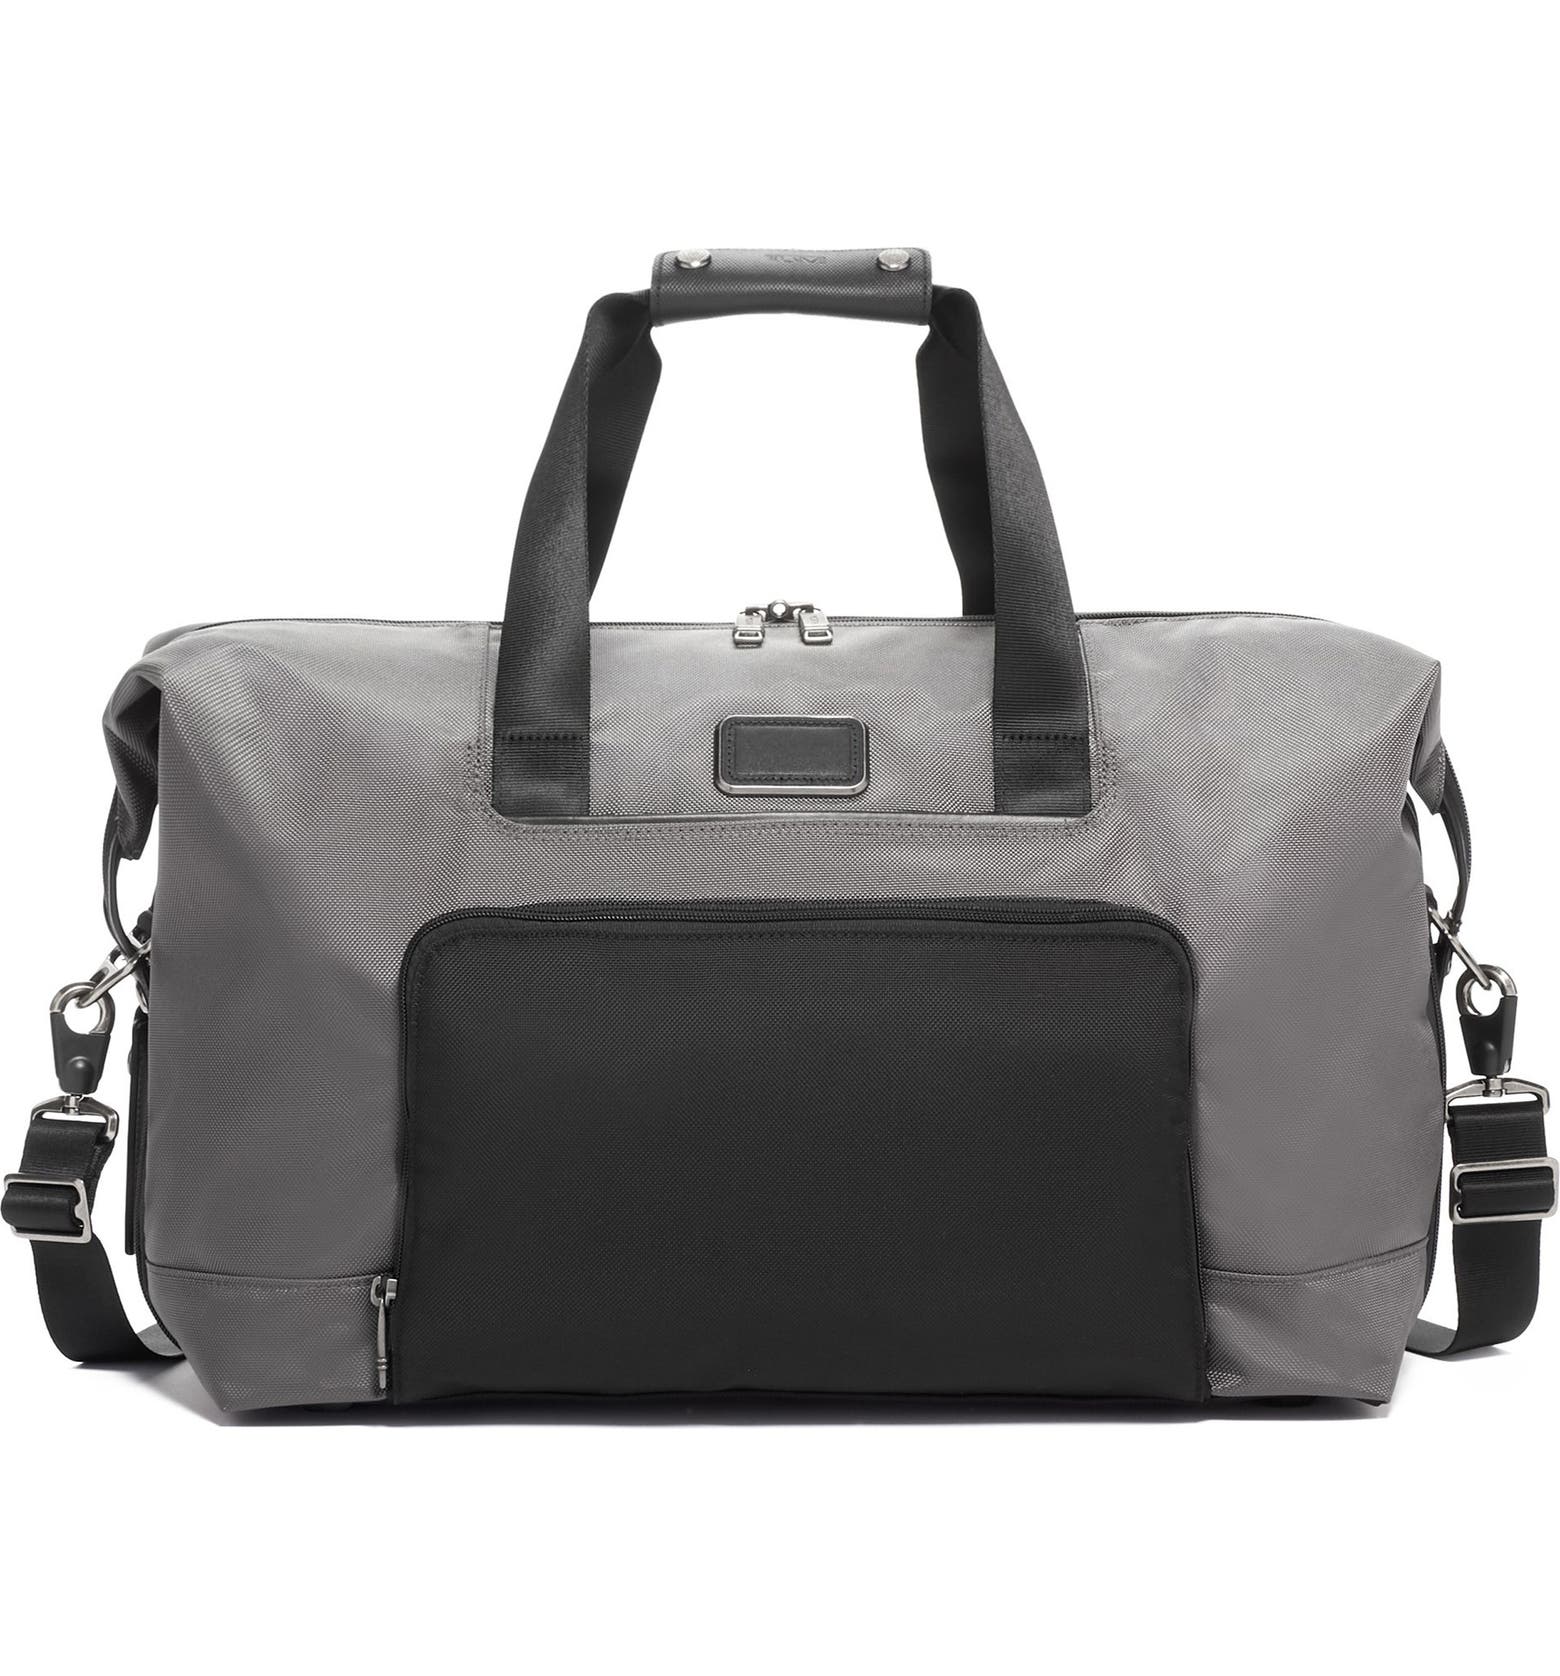 Tumi Alpha 3 Expansion Duffle Bag | Nordstrom